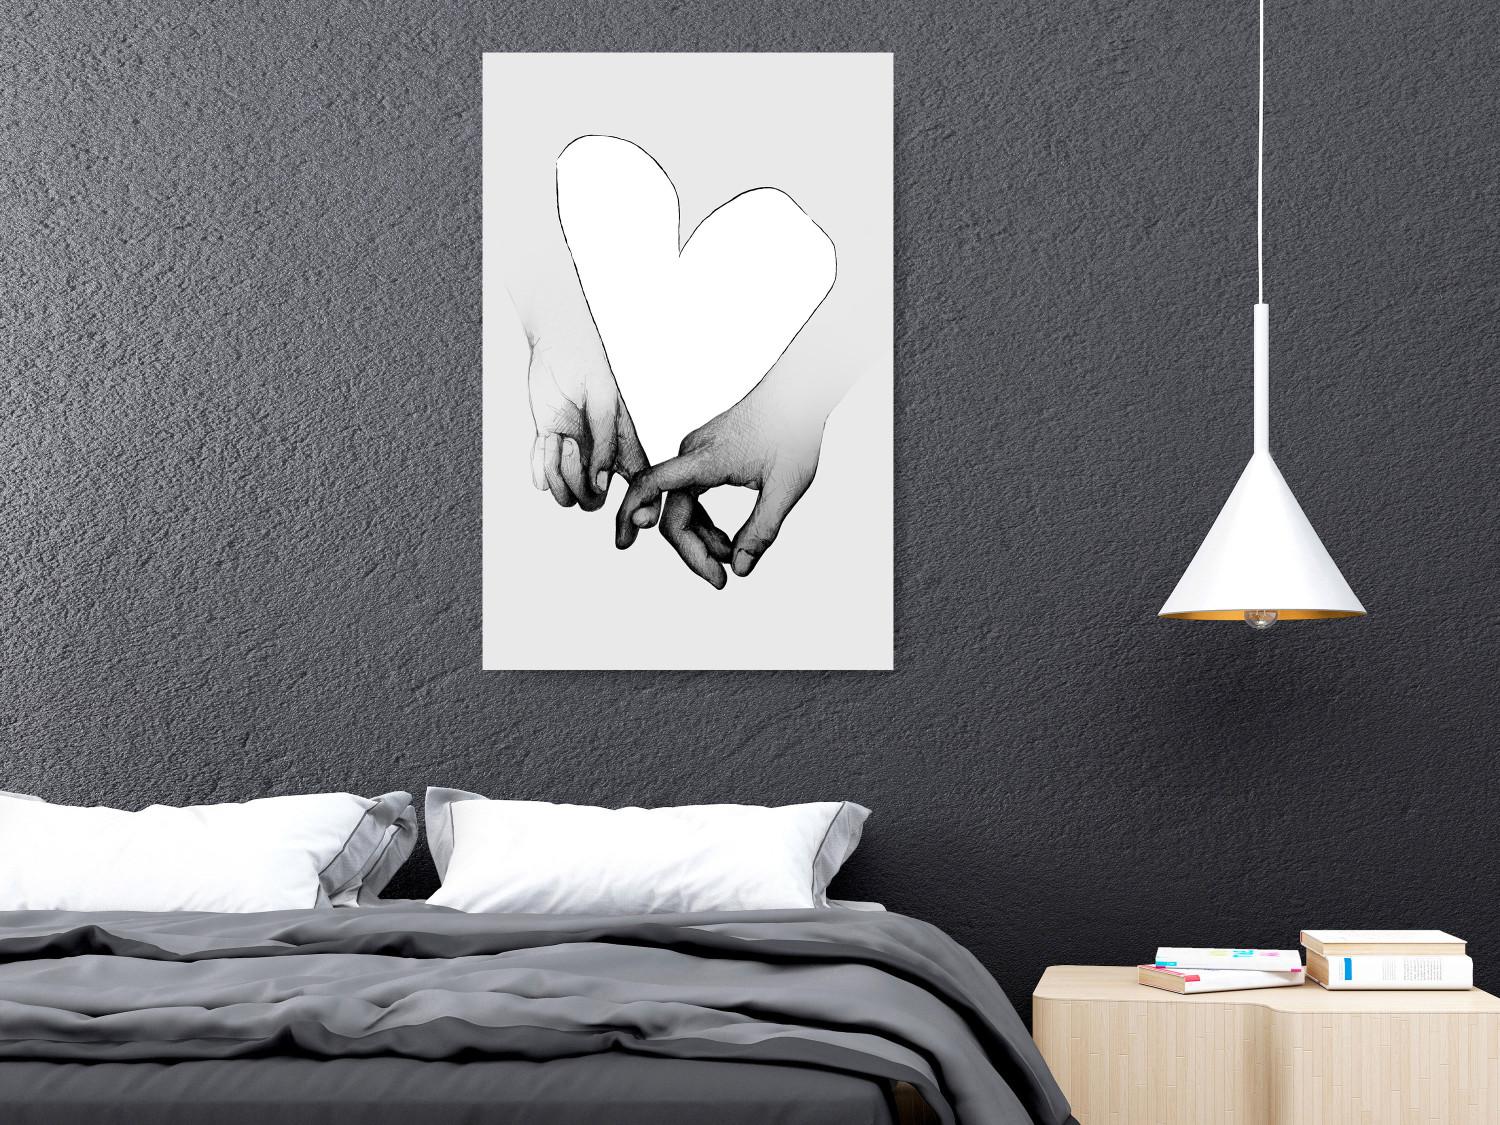 Poster Our Space - black and white clasped hands forming a heart